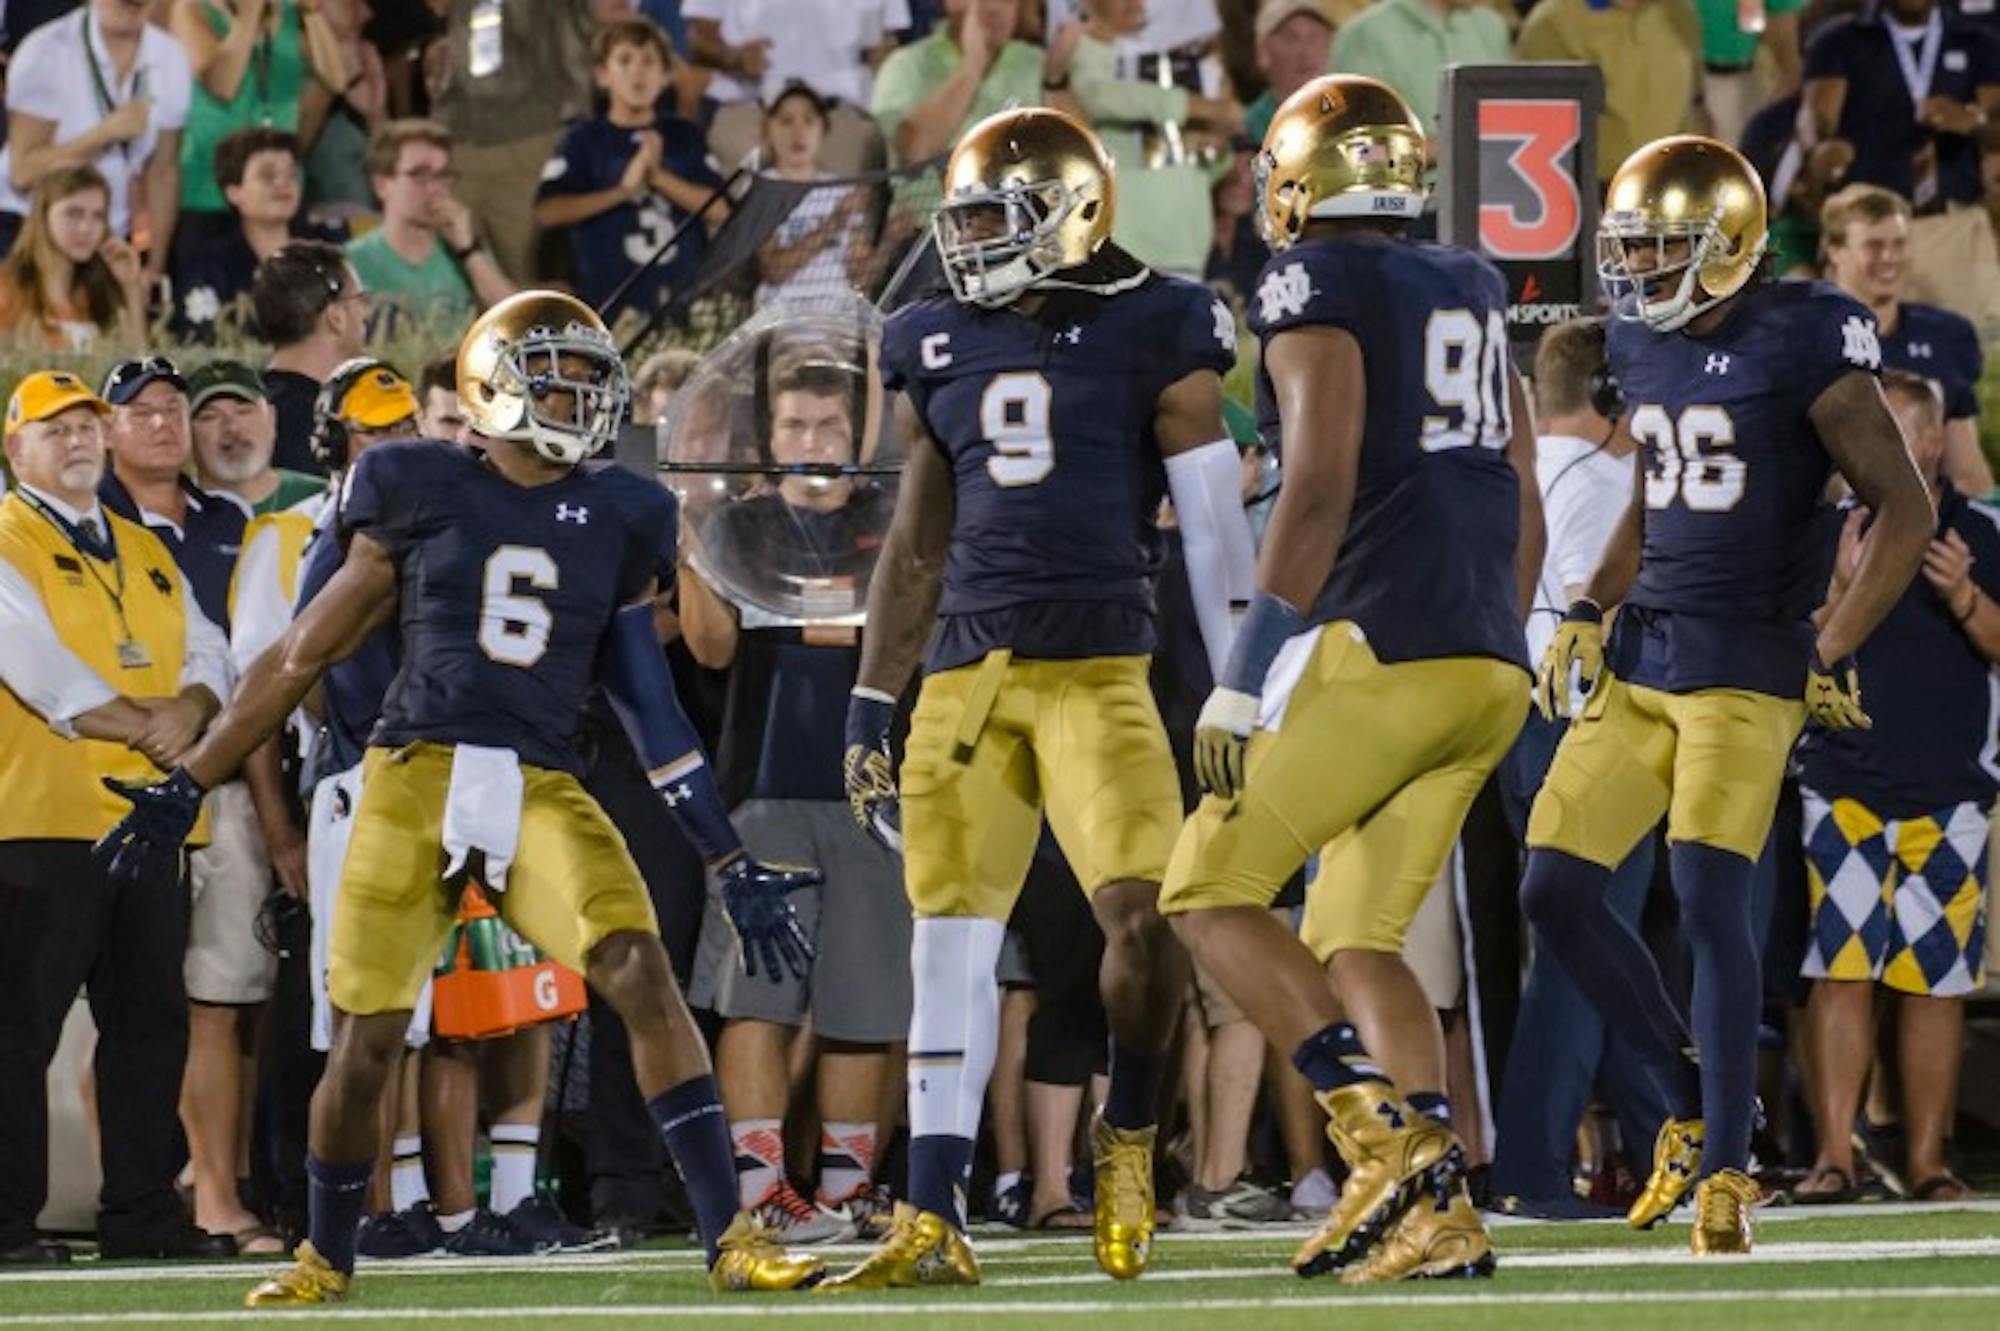 Former Irish linebacker Jaylon Smith celebrates with his teammates during Notre Dame's 38-3 victory over Texas on Sept. 4 at Notre Dame Stadium.